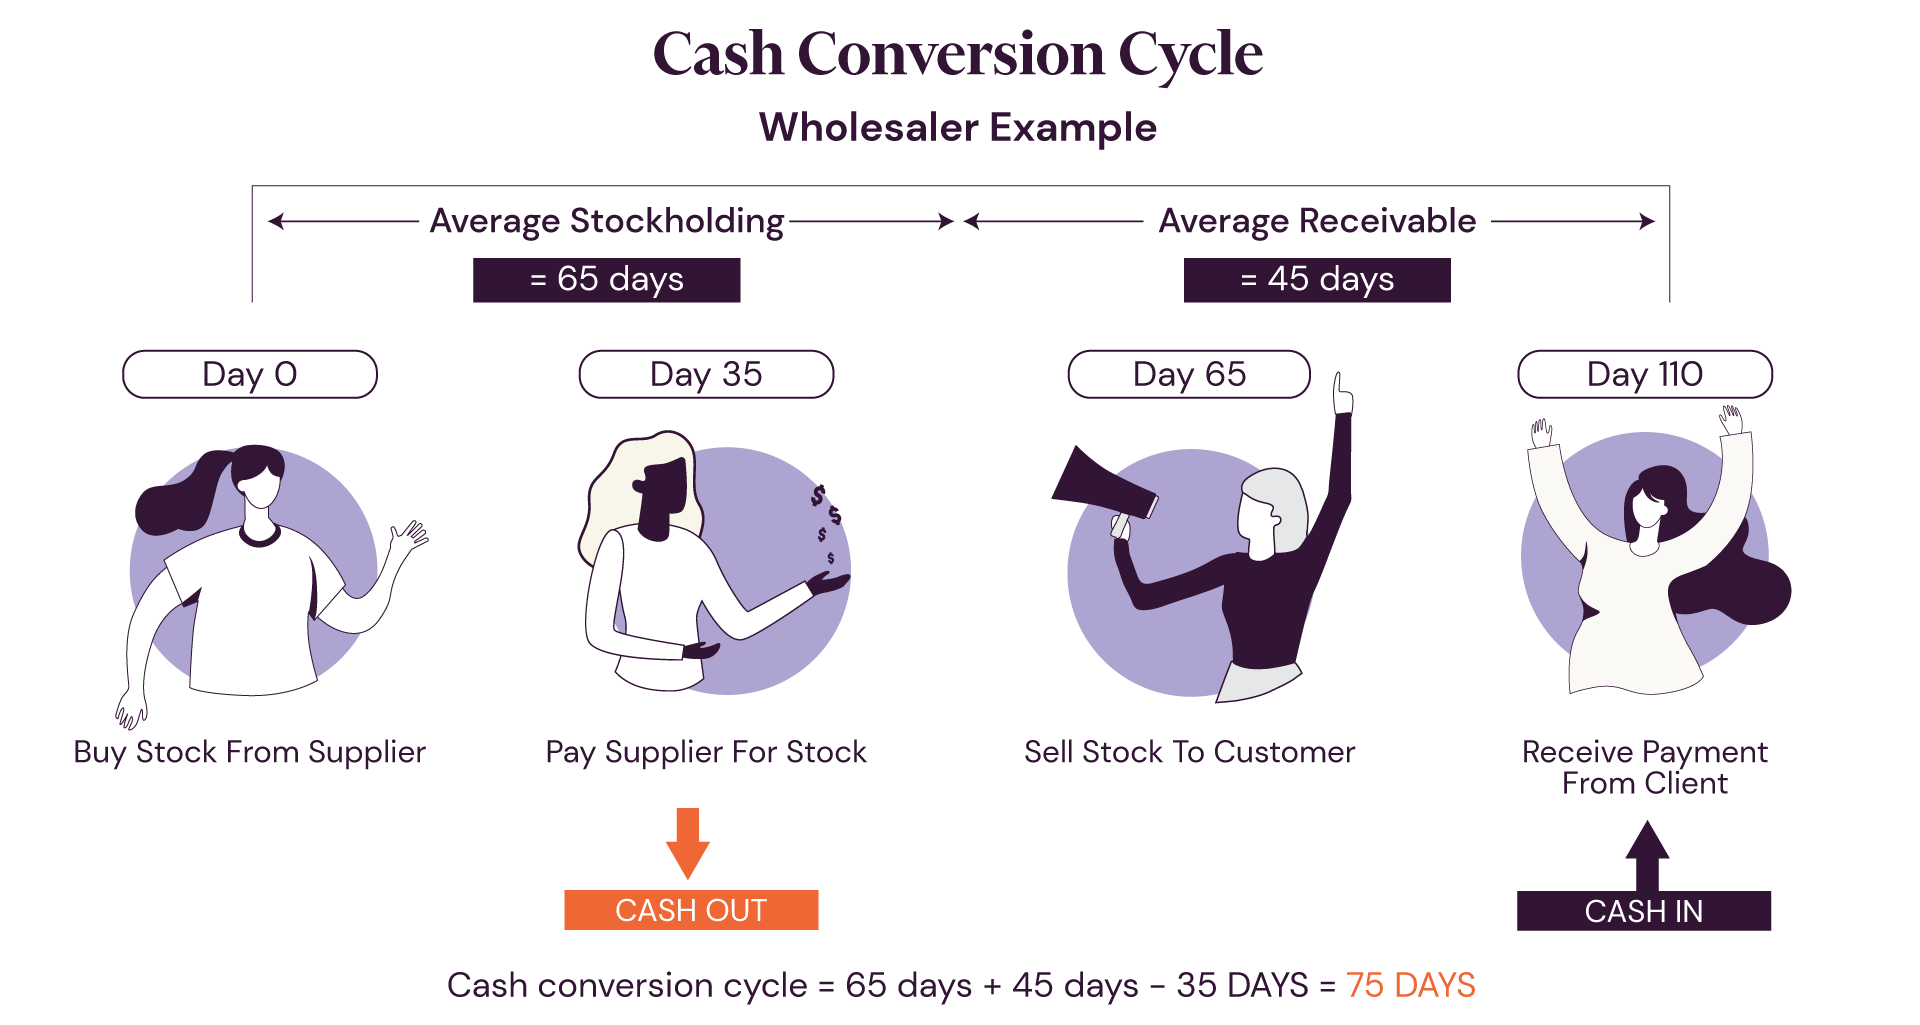 Cash Conversion Cycle rebranded with title (Wholesaler)